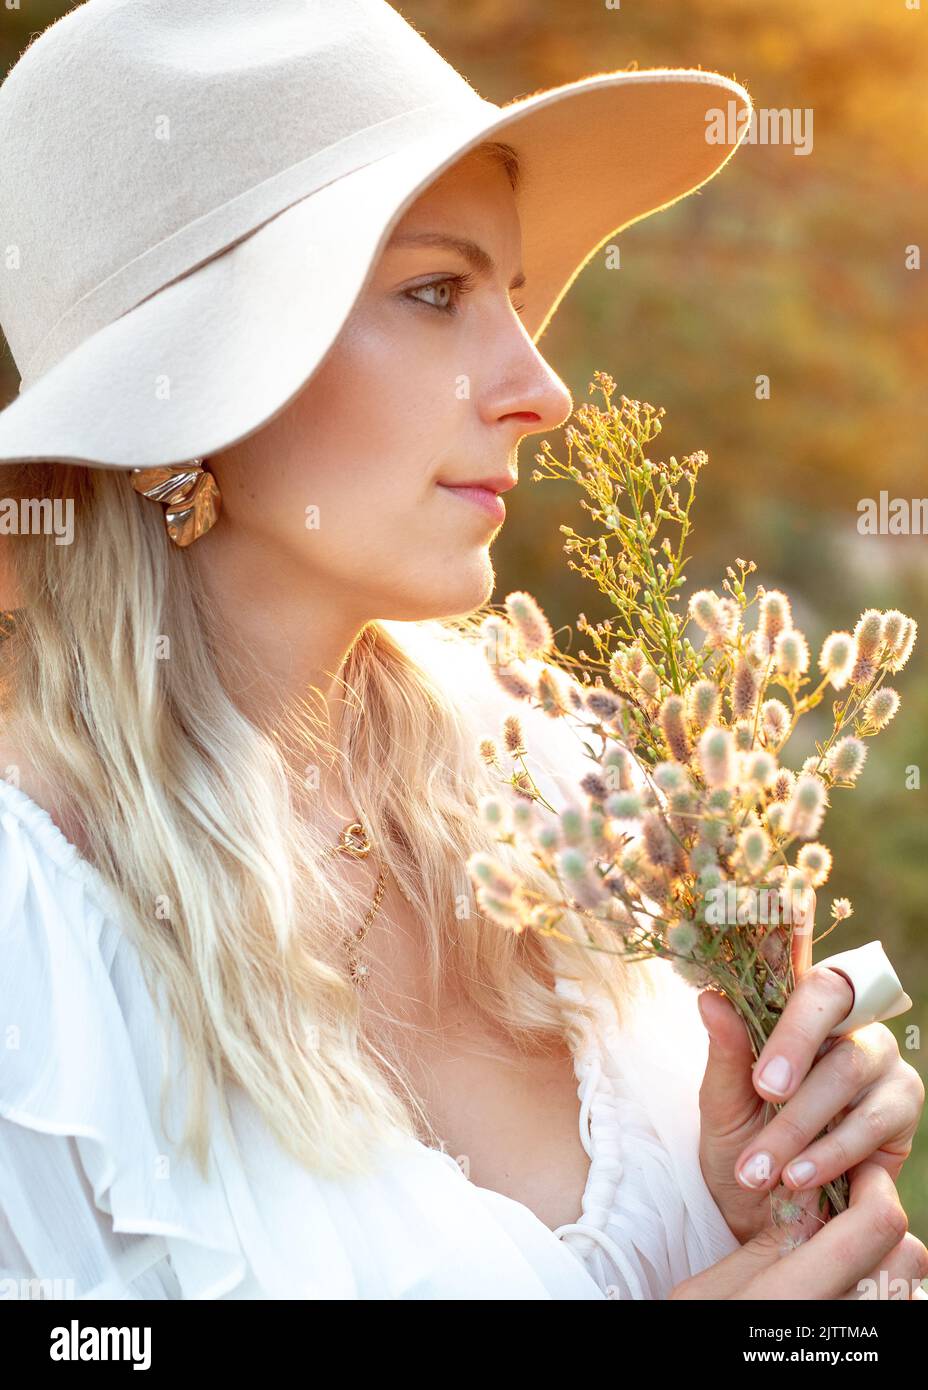 Side view of young adorable woman wearing white dress, beige floppy hat, holding, sniffing at bouquet of wildflowers. Stock Photo